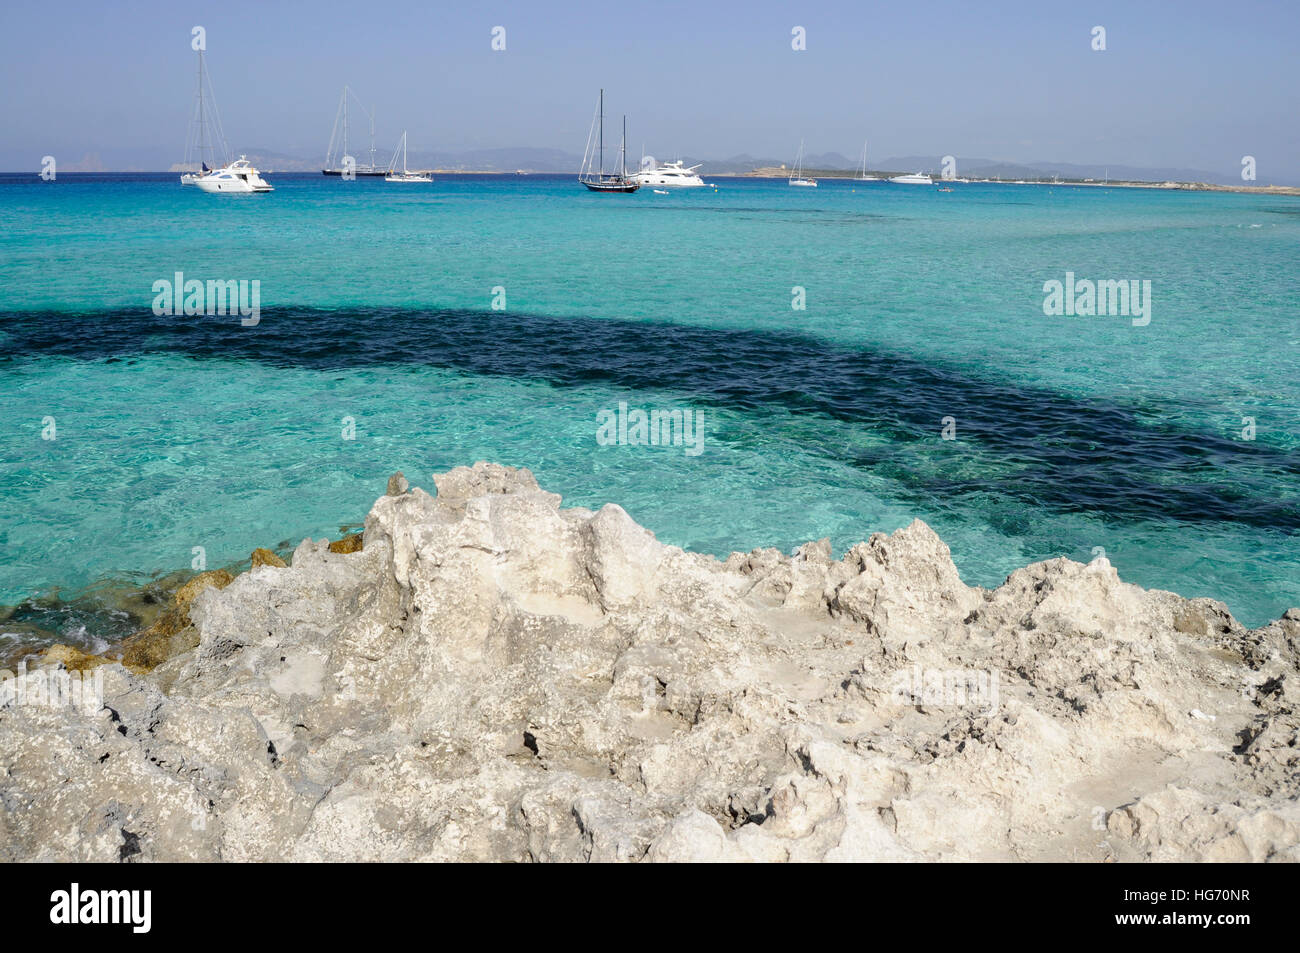 View of colorful sea of Formentera with boats at anchor Stock Photo